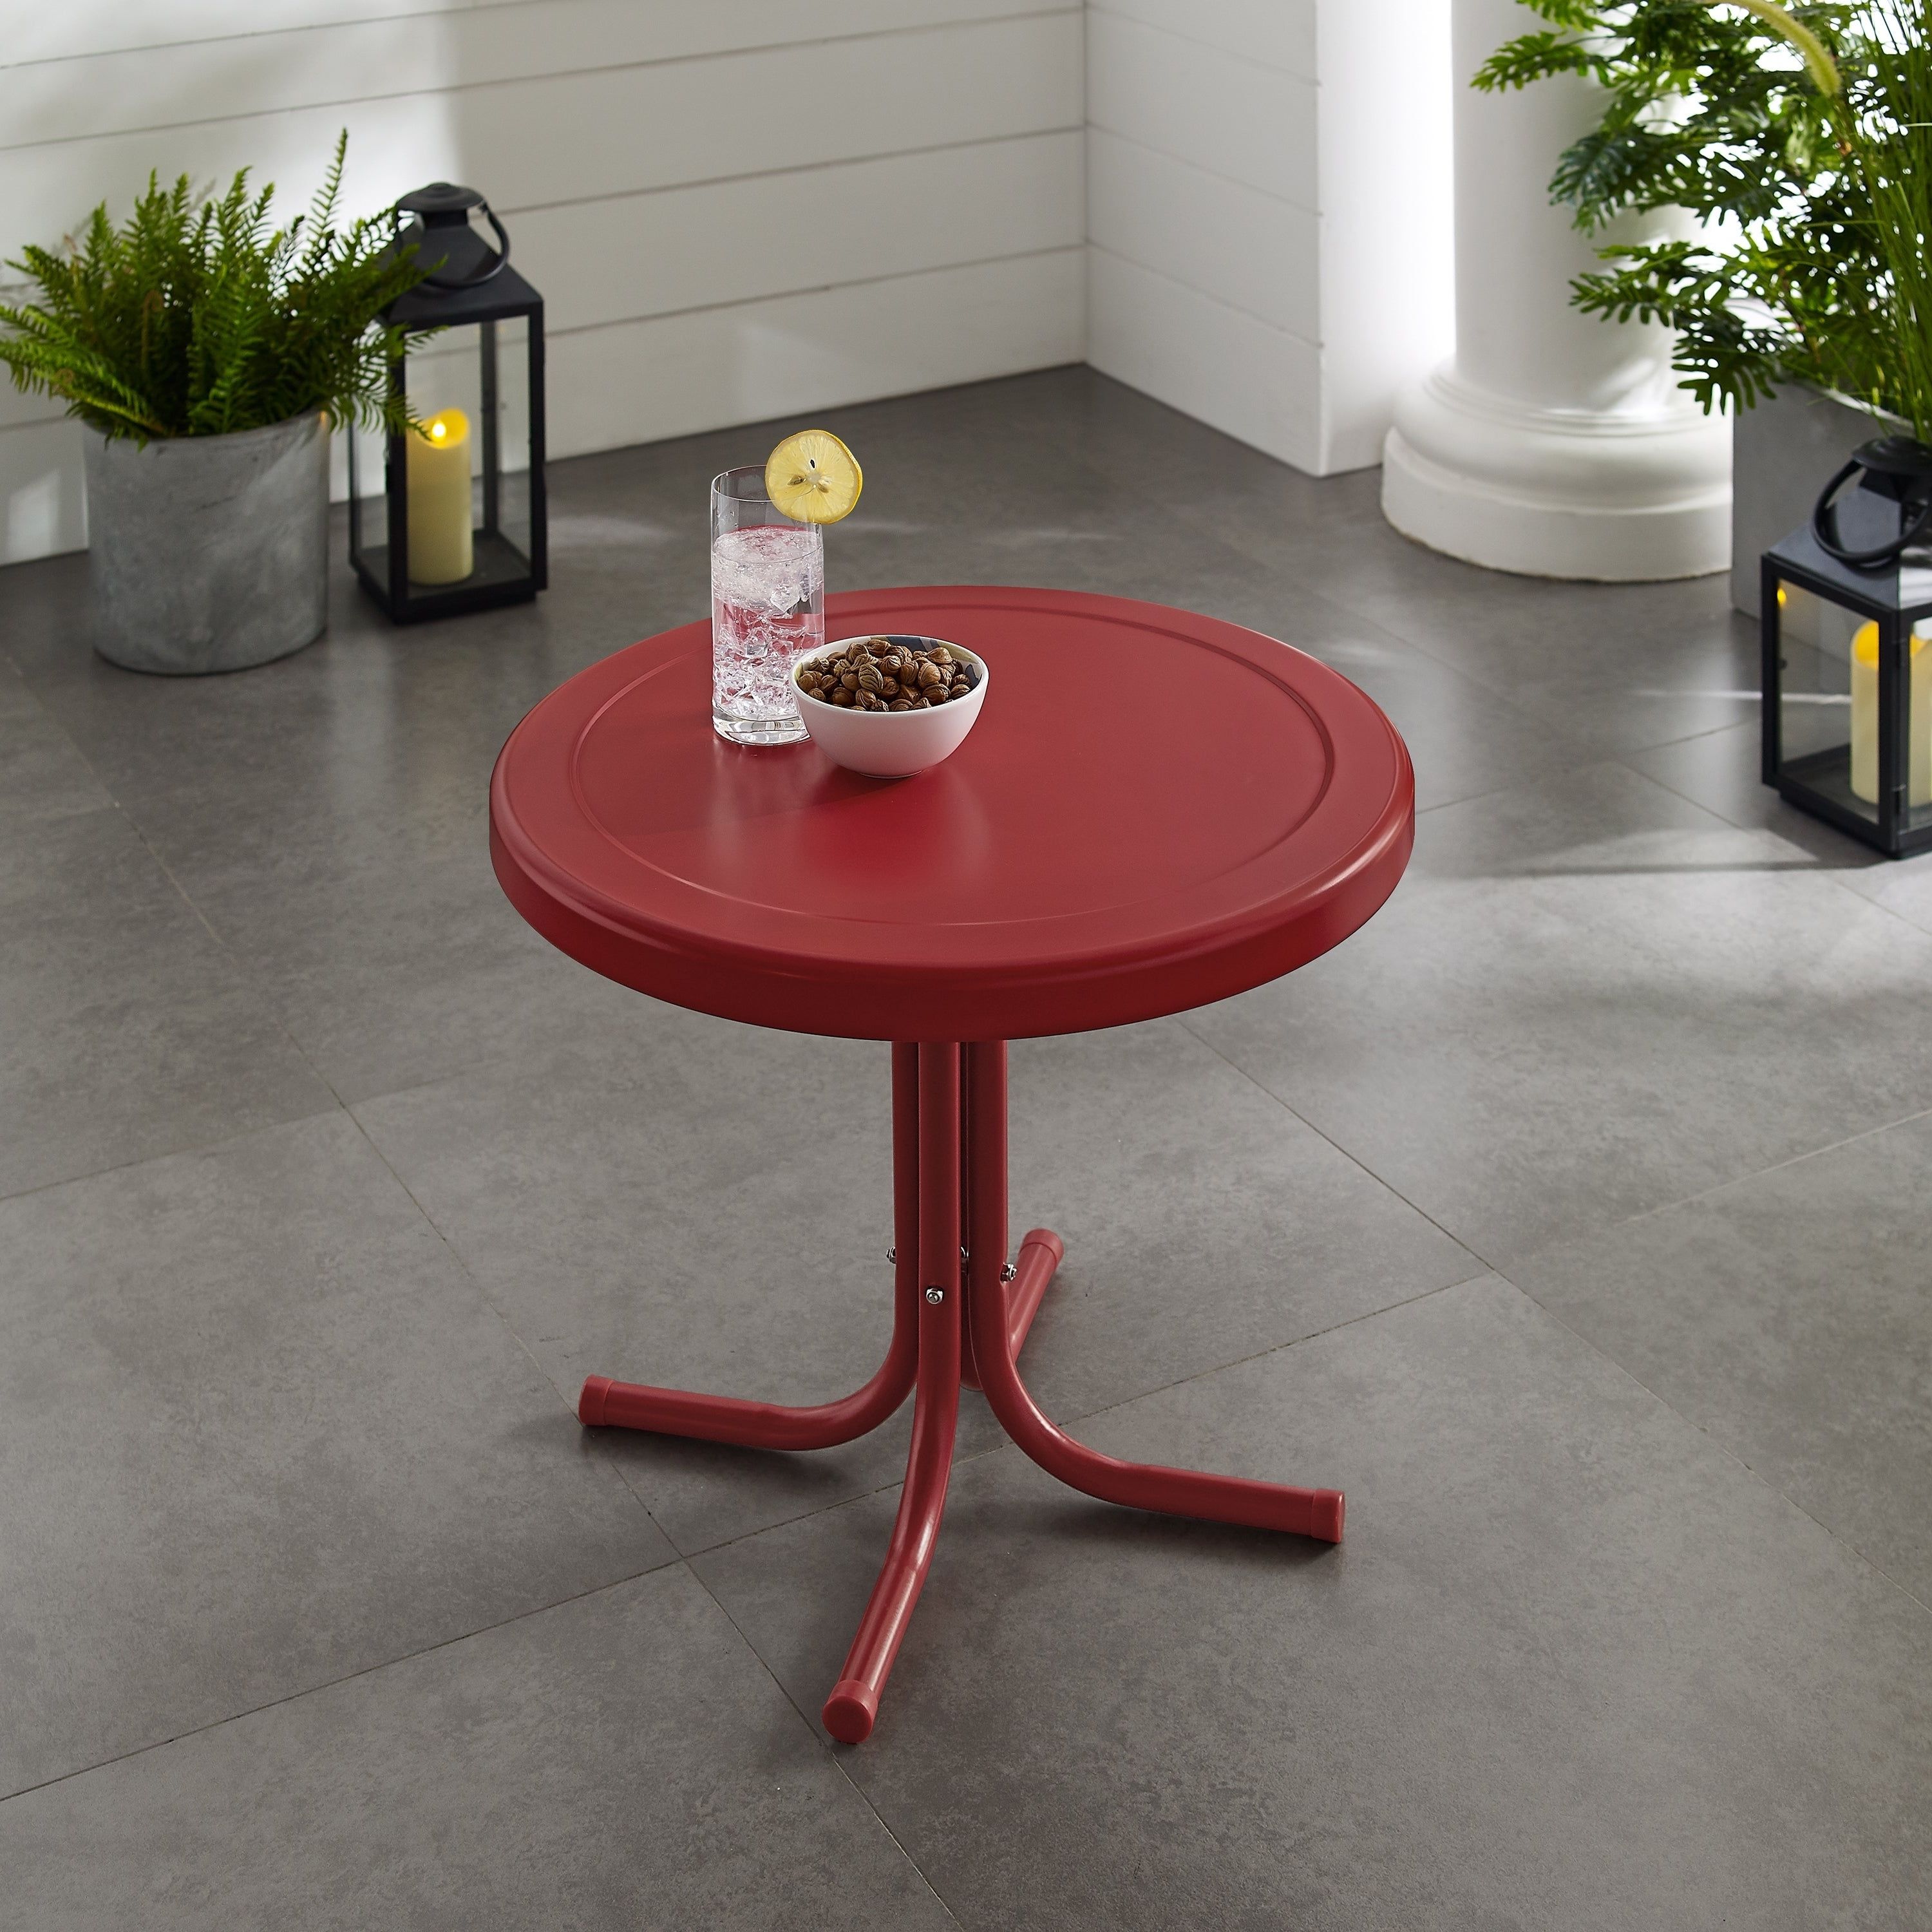 Find Great Outdoor Throughout Favorite Bate Red Retro 3 Piece Dining Sets (View 15 of 25)